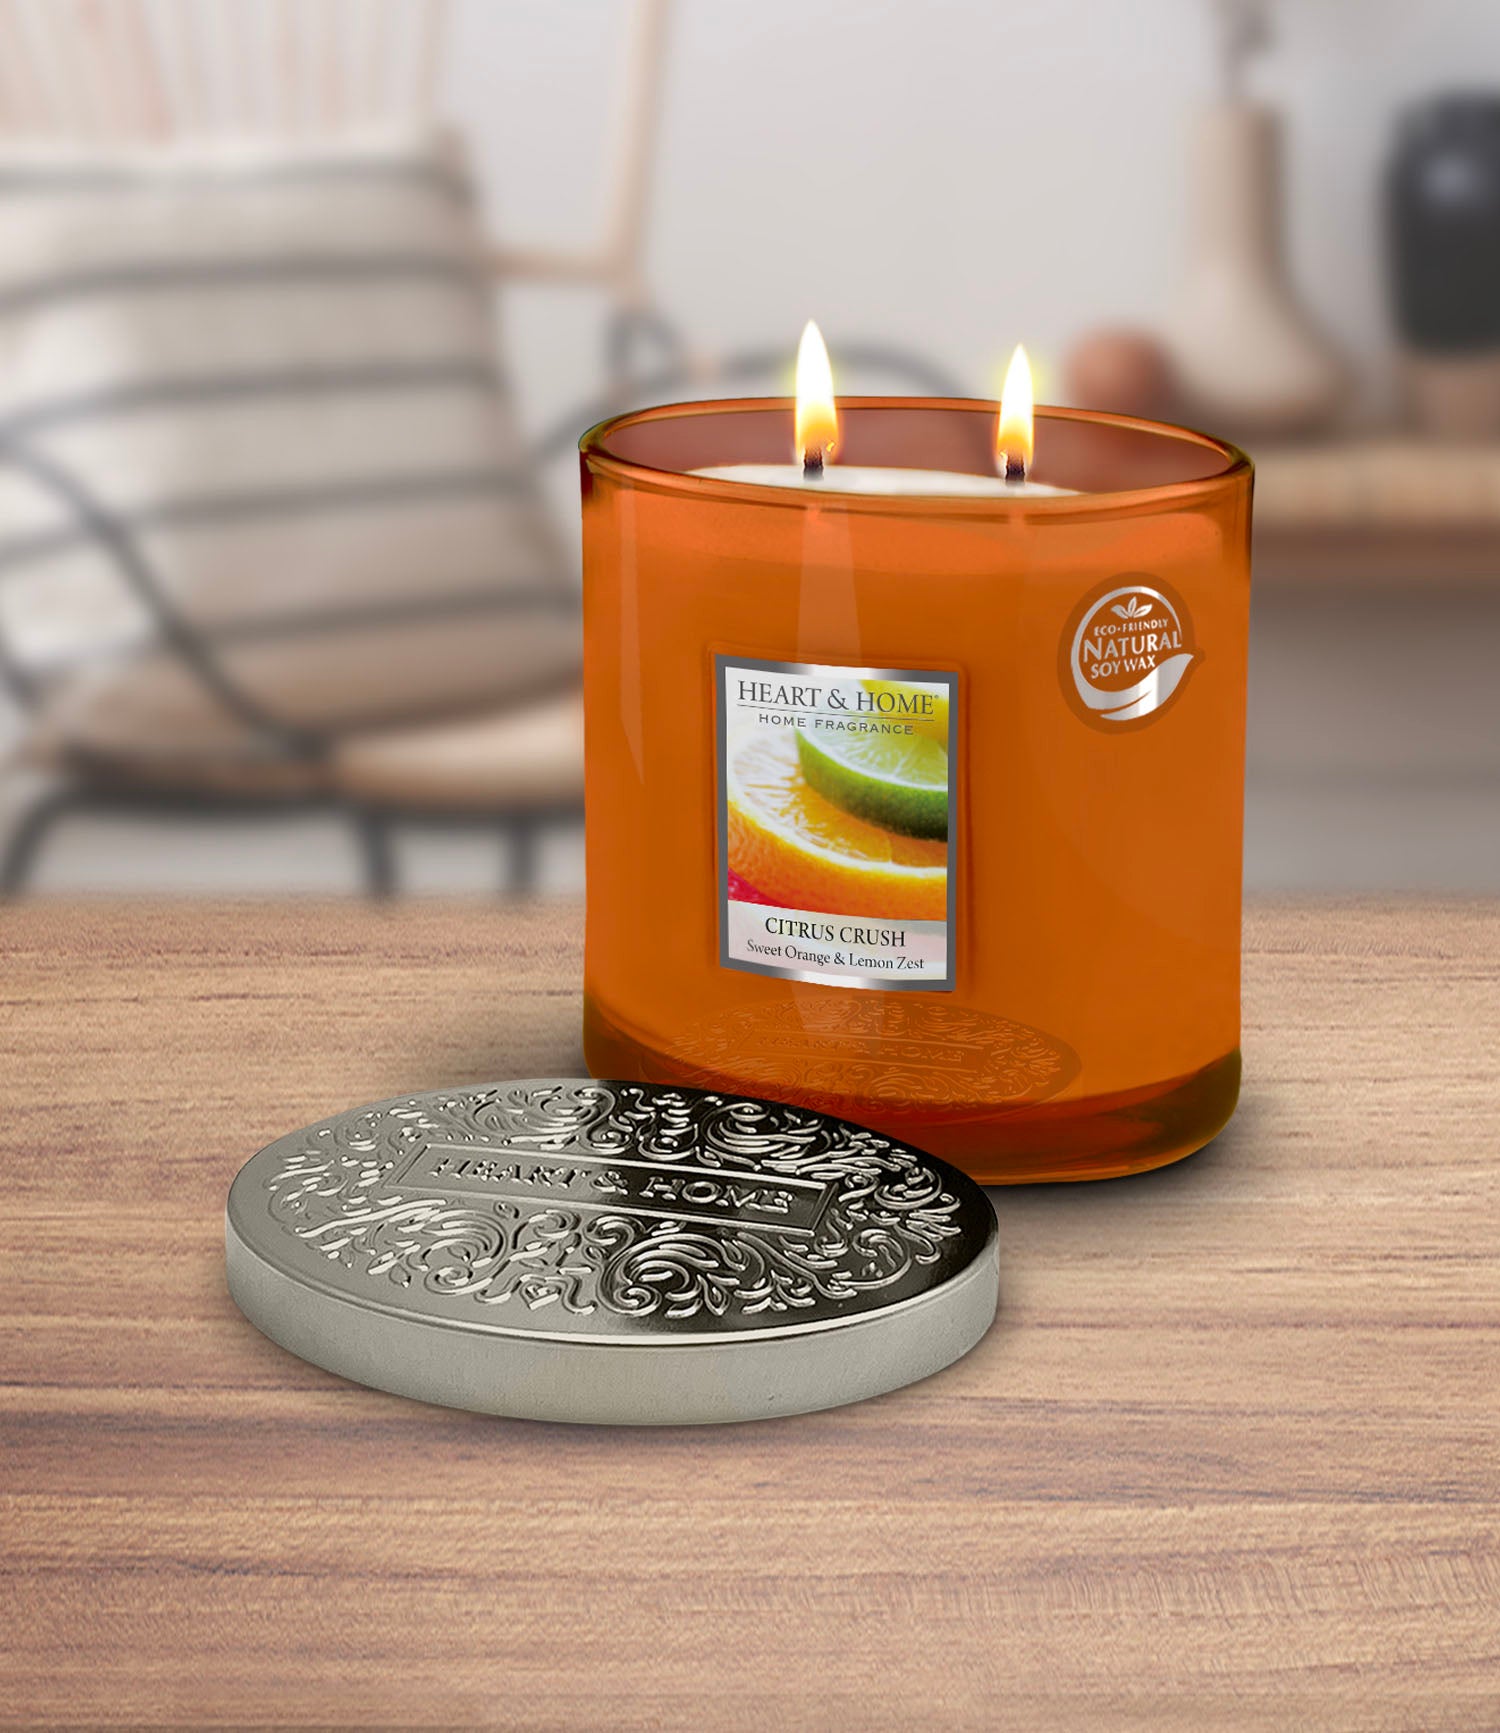 H&H Citrus Crush Two Wick Ellipse Candle